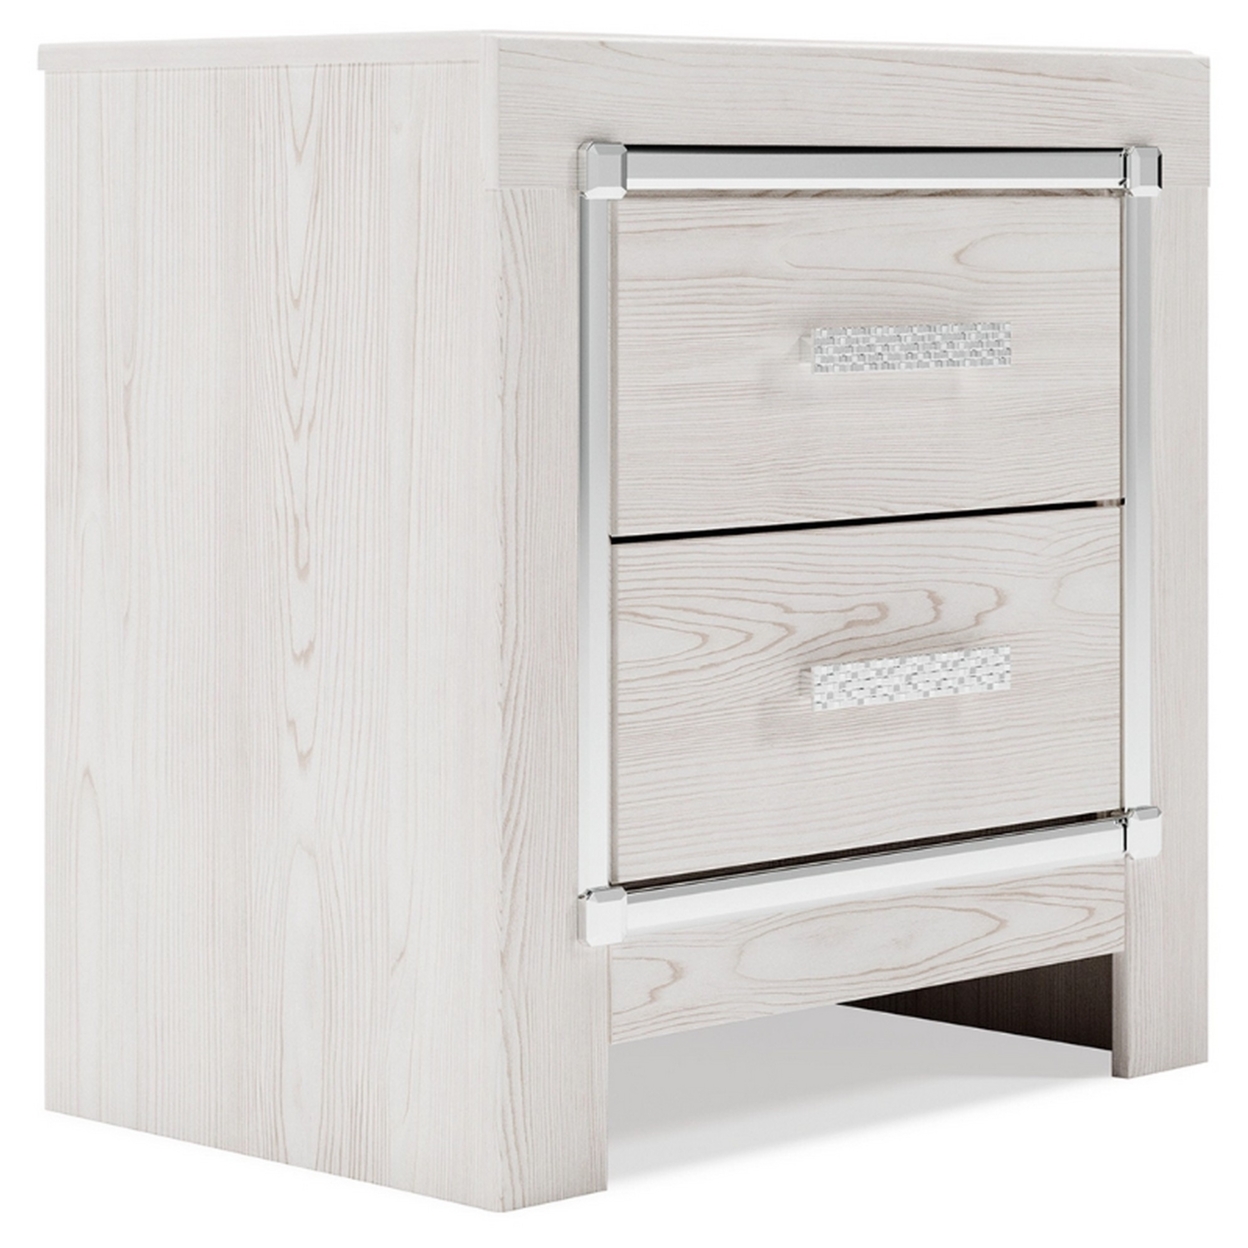 Wooden Nightstand With 2 Drawers And USB Ports, White- Saltoro Sherpi